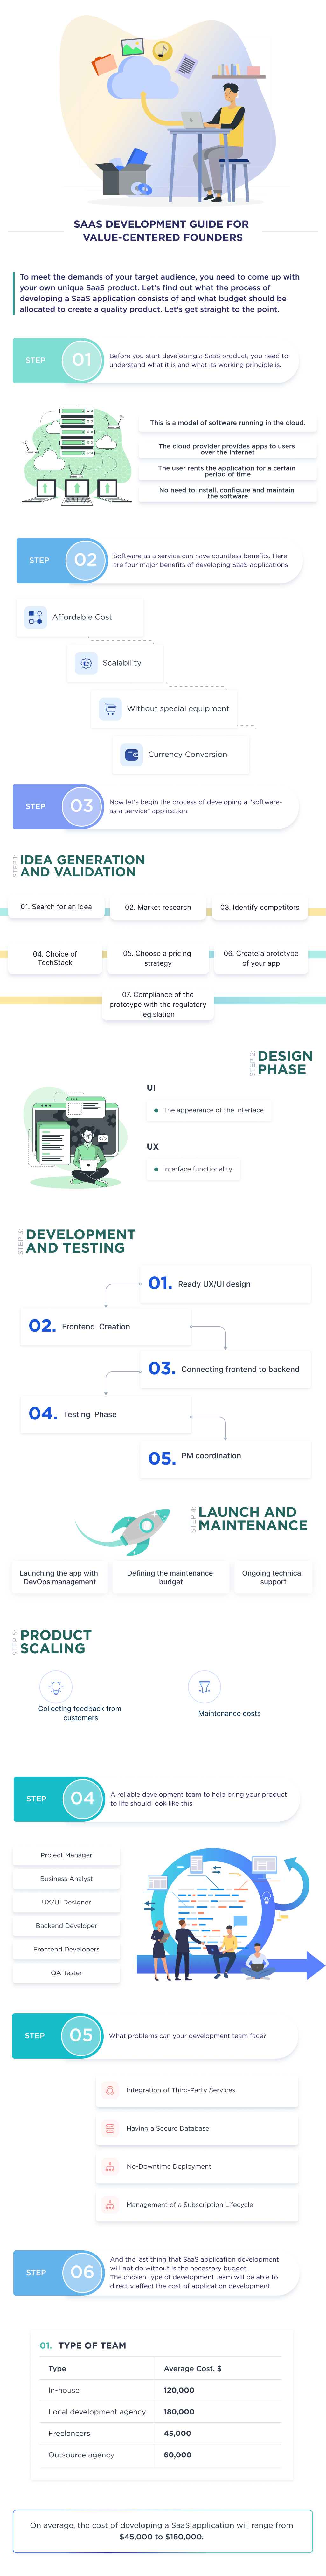 This infographic describes the detailed process of how to develop a SaaS application from scratch.